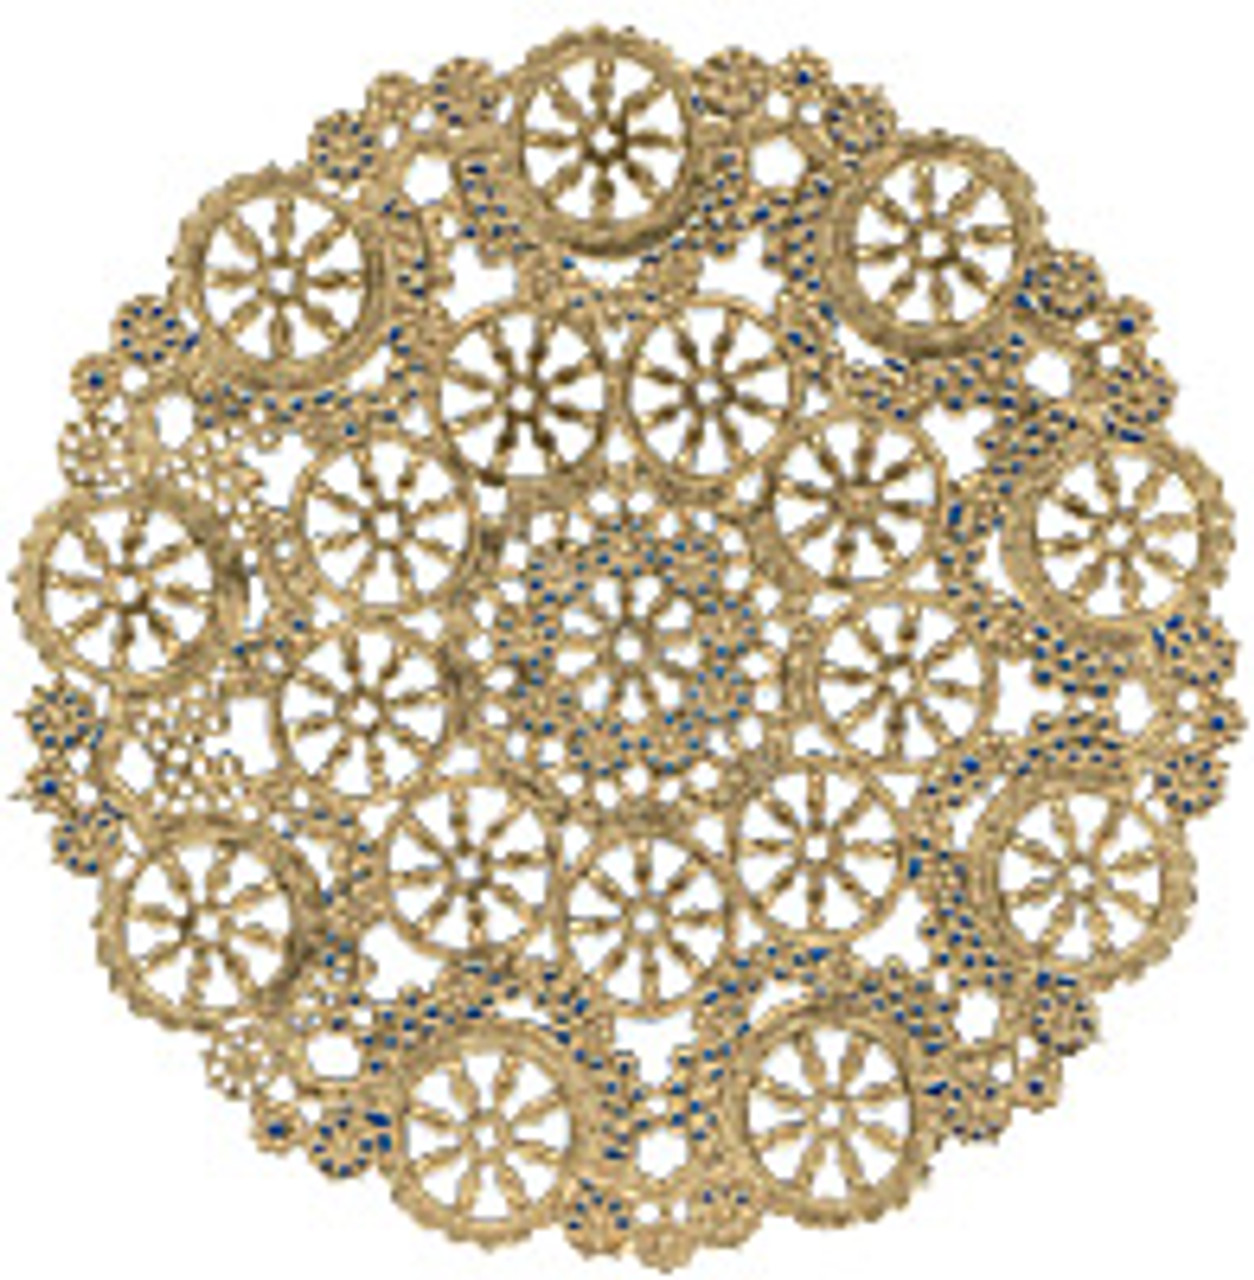 Medallion 12 White Paper Doilies, Royal Lace, 8/pack, 24 packs/case